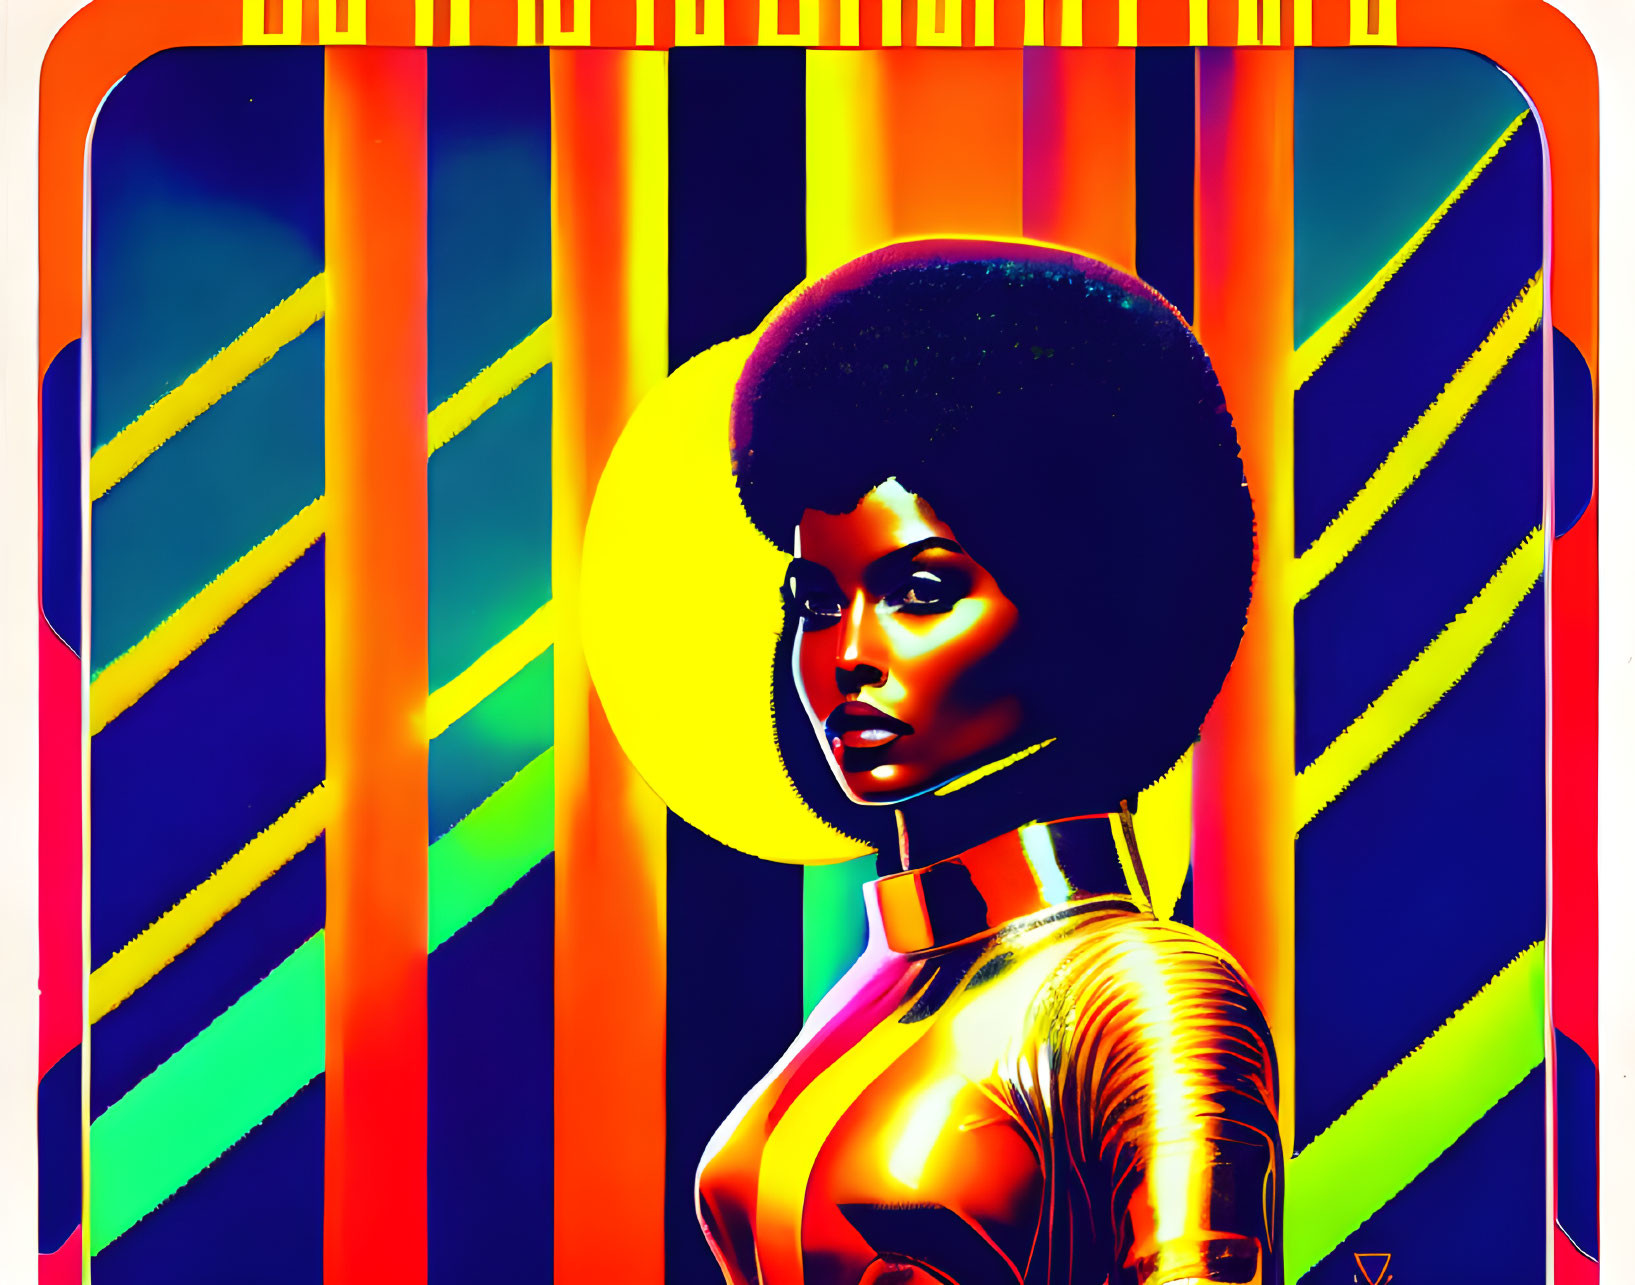 Stylized woman with prominent afro in retro-futuristic style